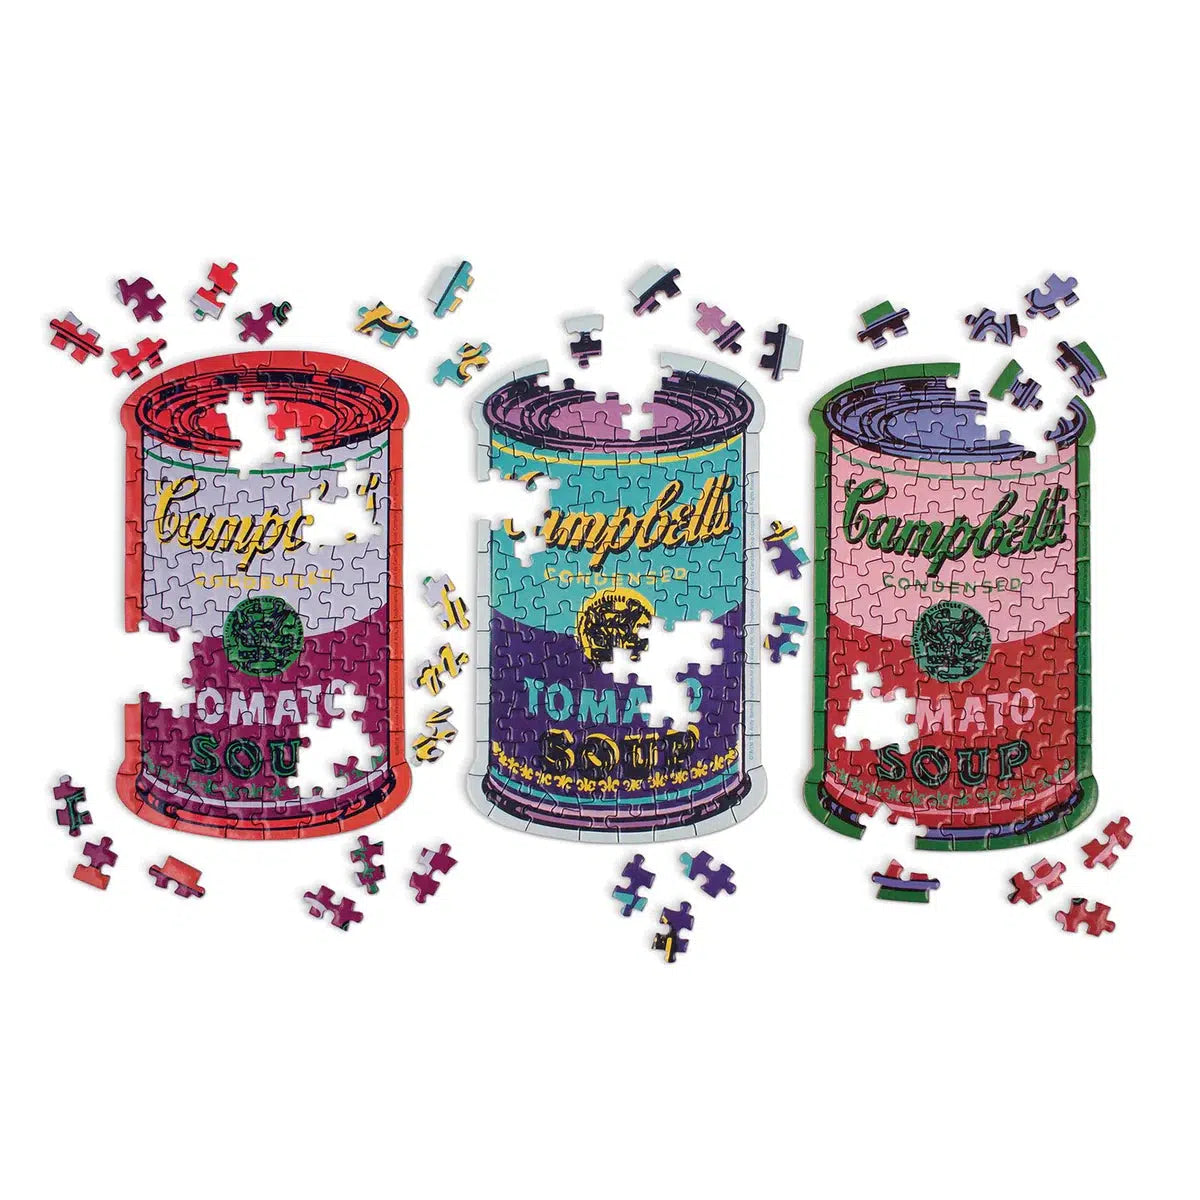 Andy Warhol Soup Cans Set of 3 100 Piece Shaped Puzzles in Tins Galison